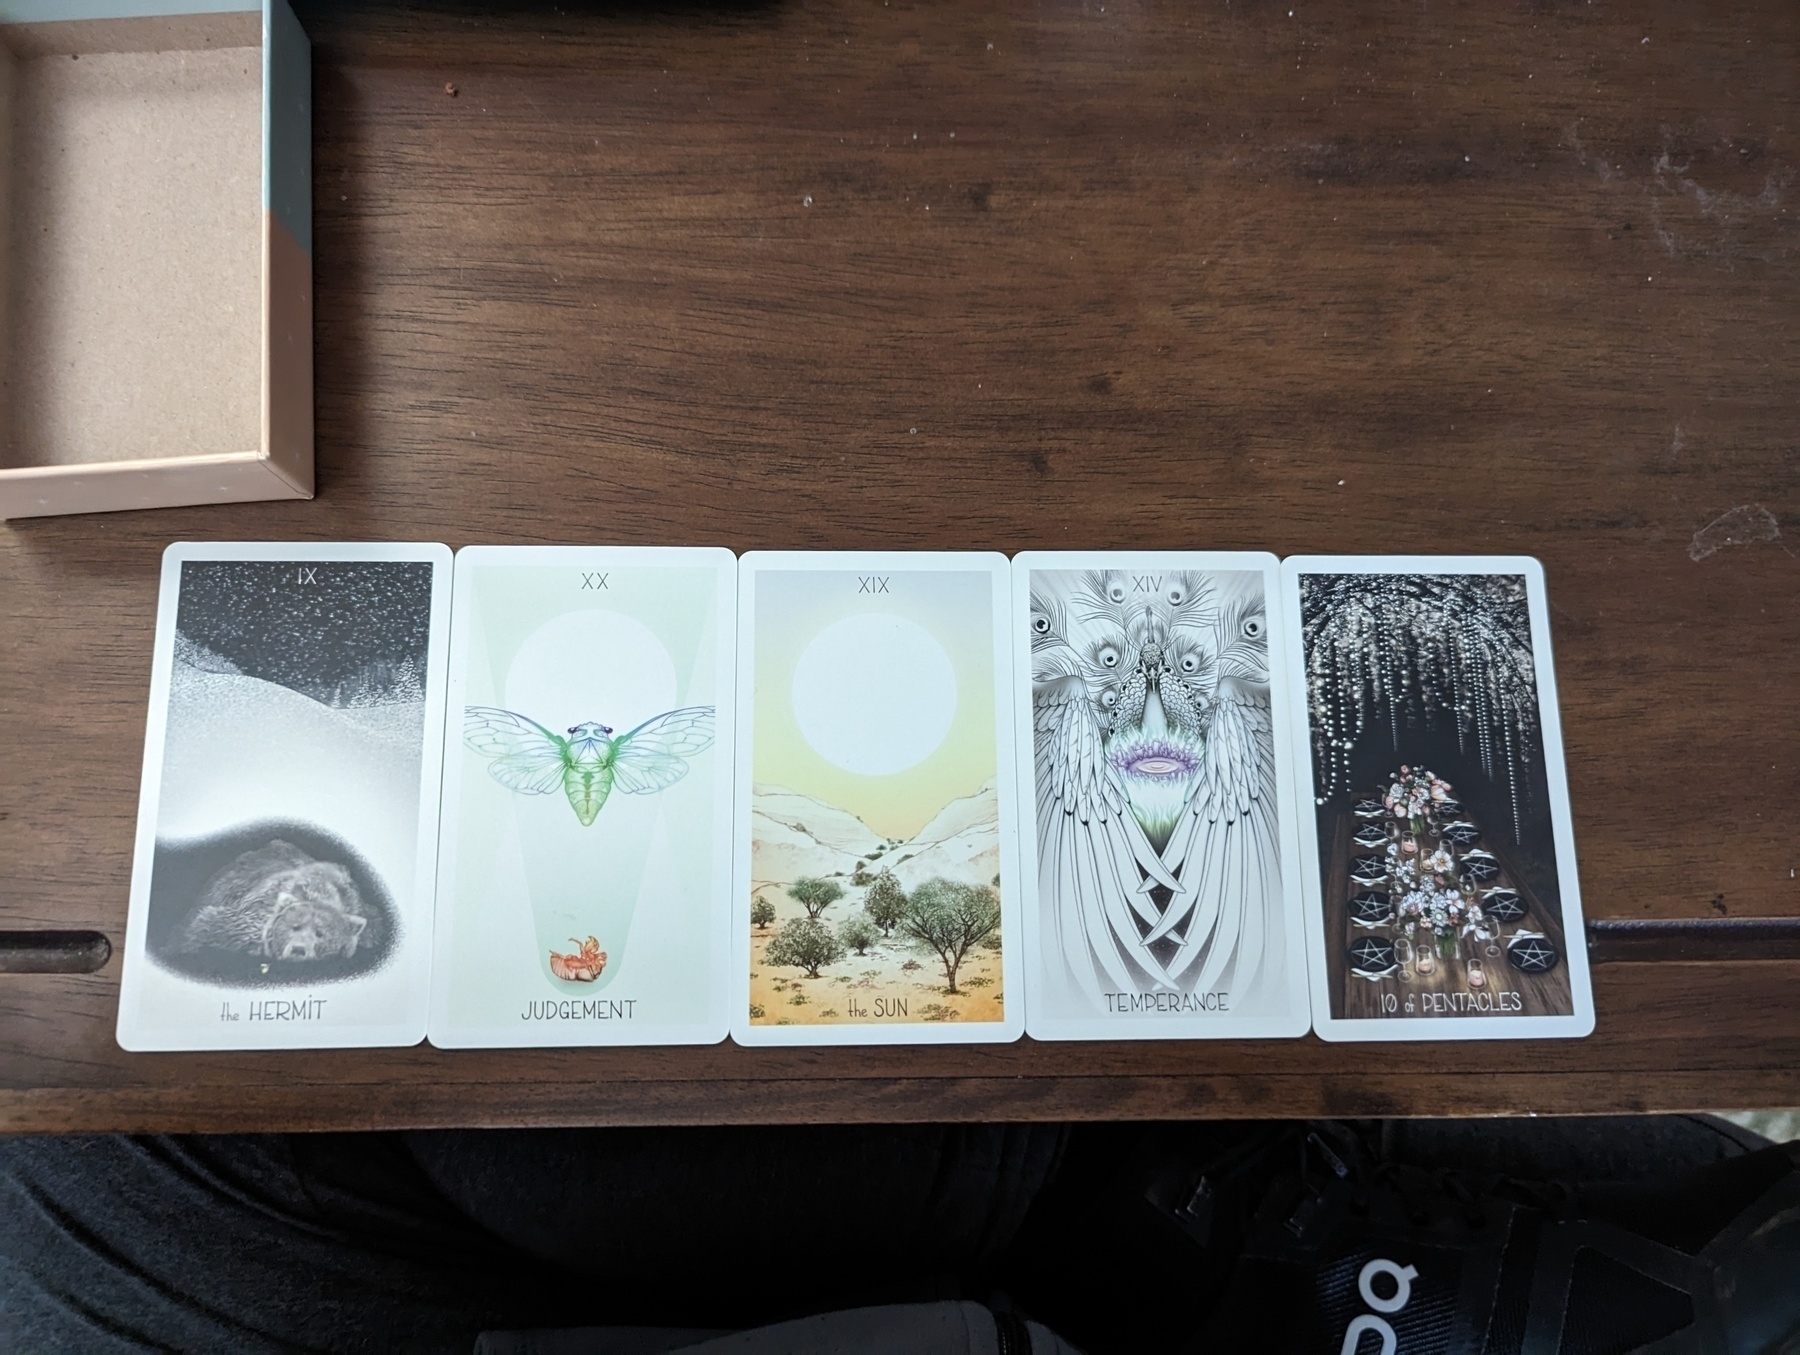 Five cards from The Wayhome Tarot: The Hermit, Judgment, The Sun, Temperance, Ten of Pentacles